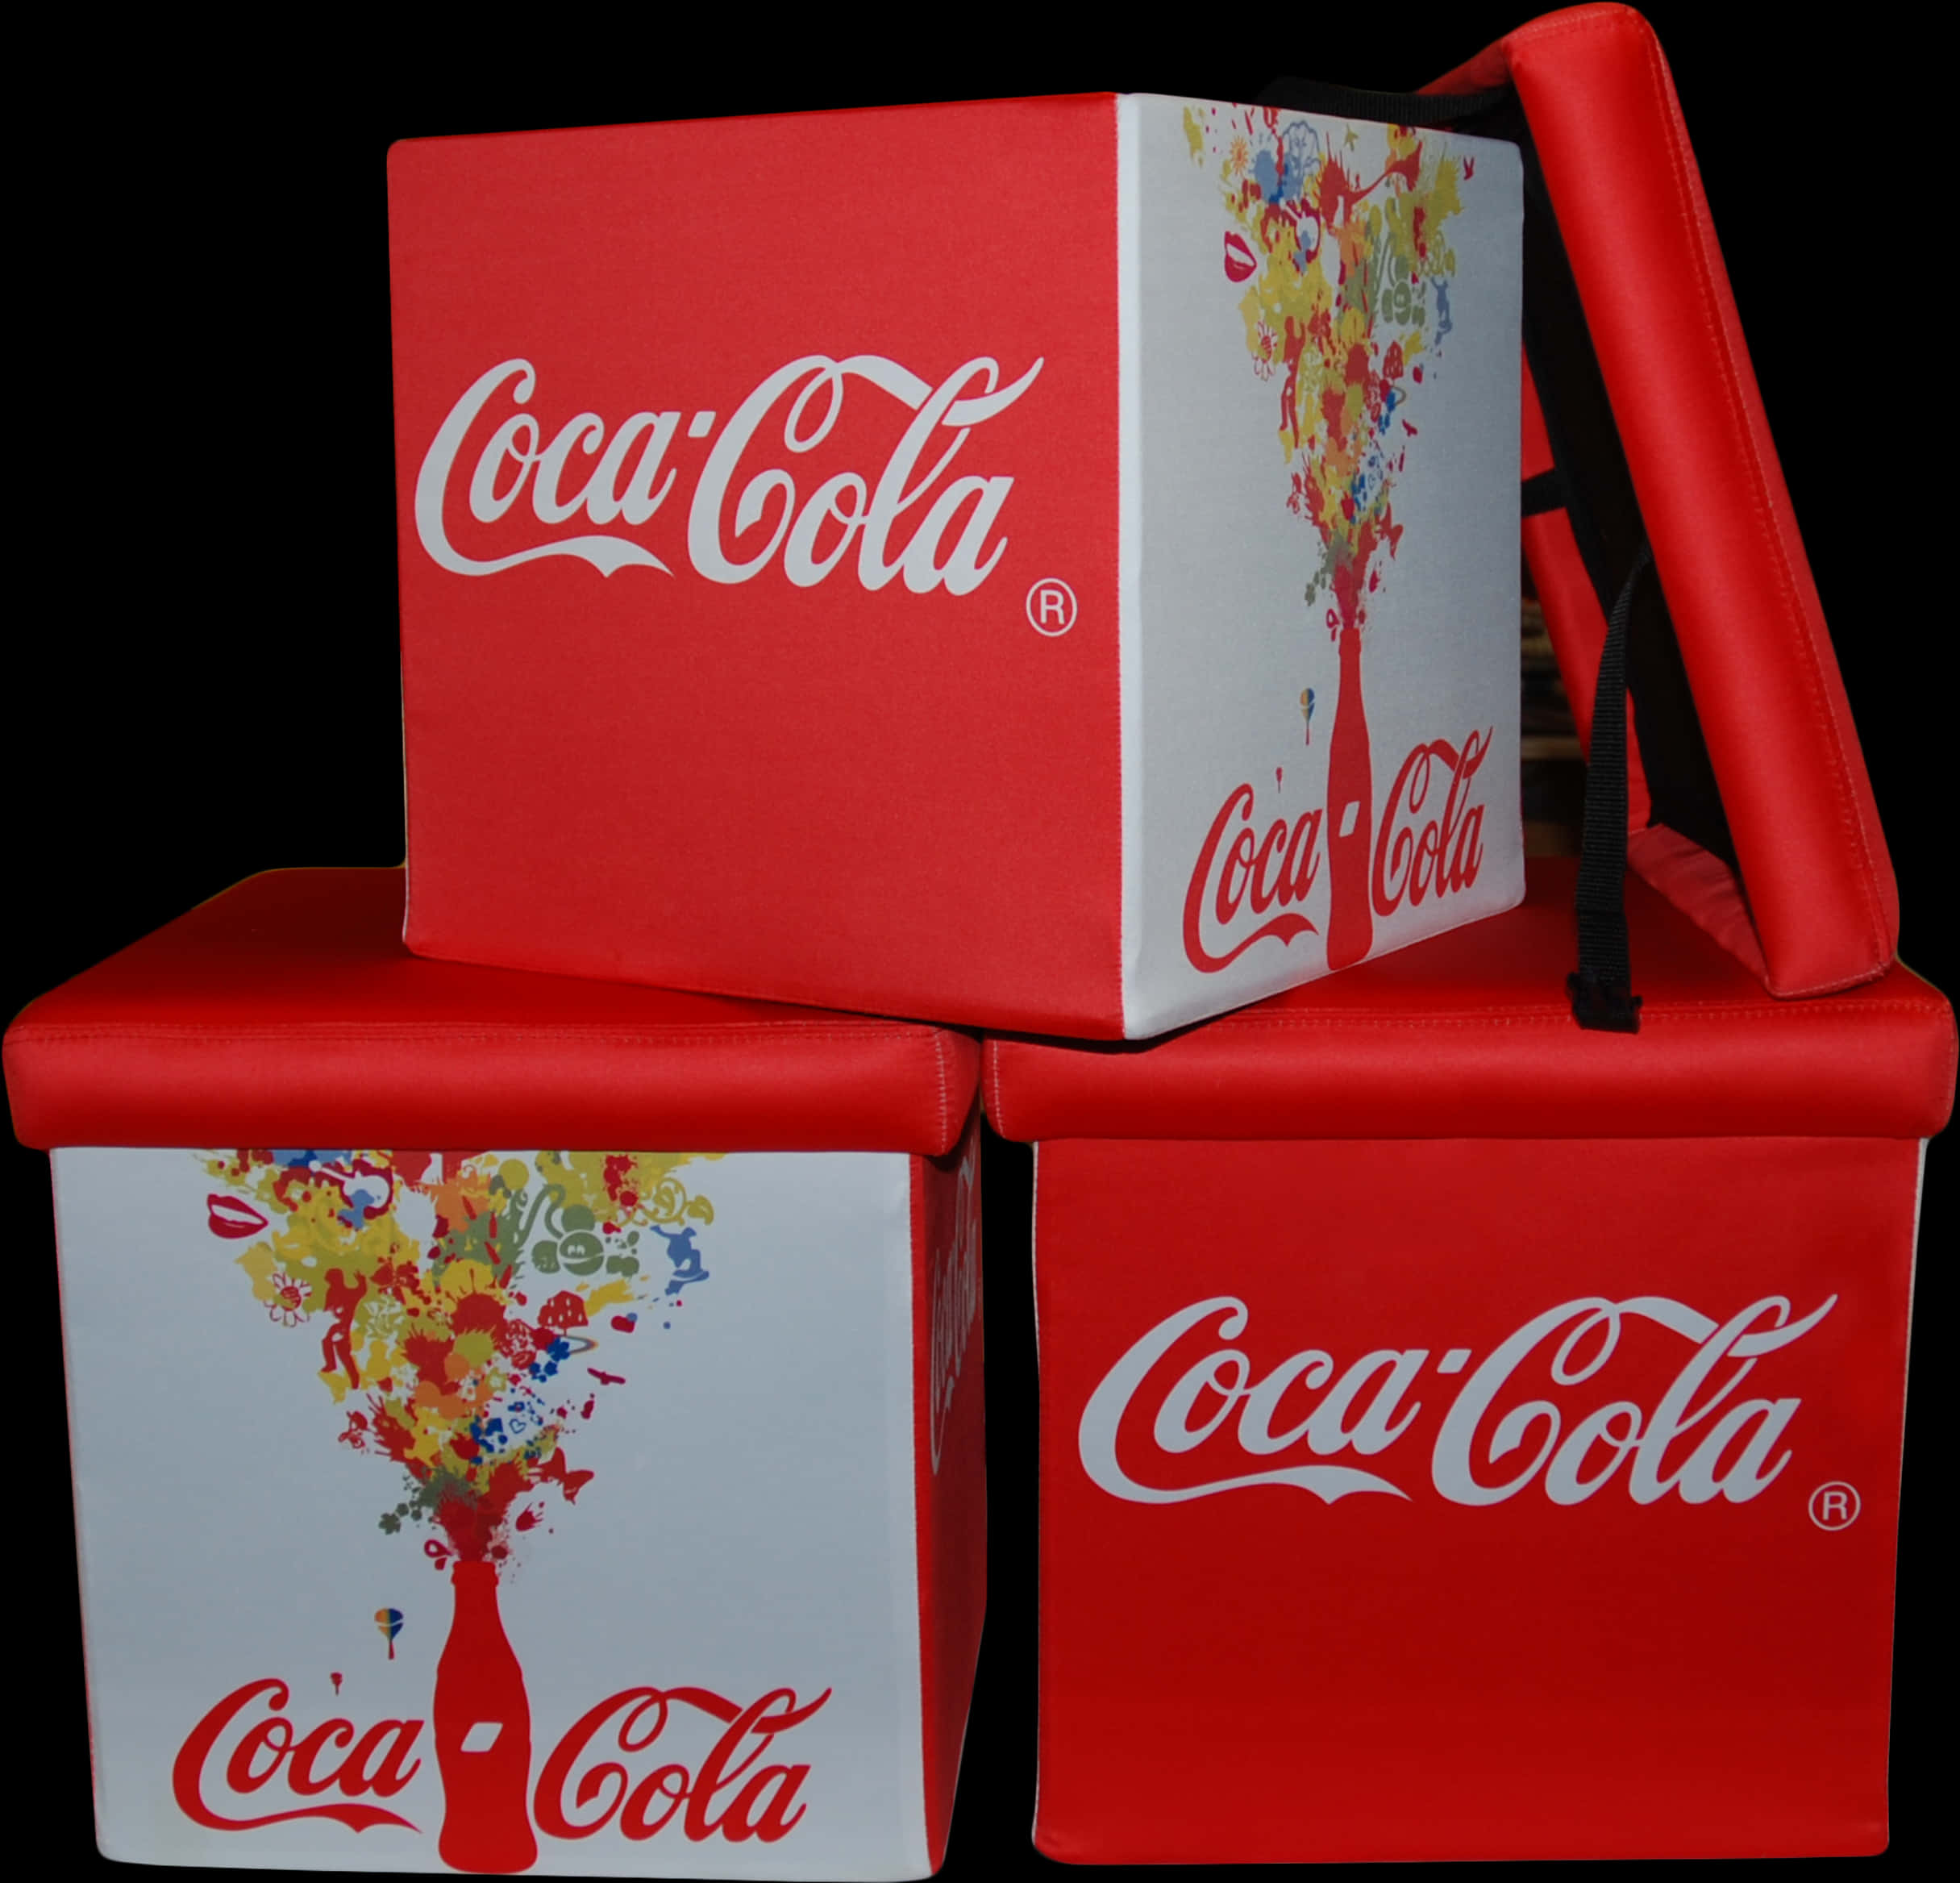 A Group Of Boxes With Logos On Them